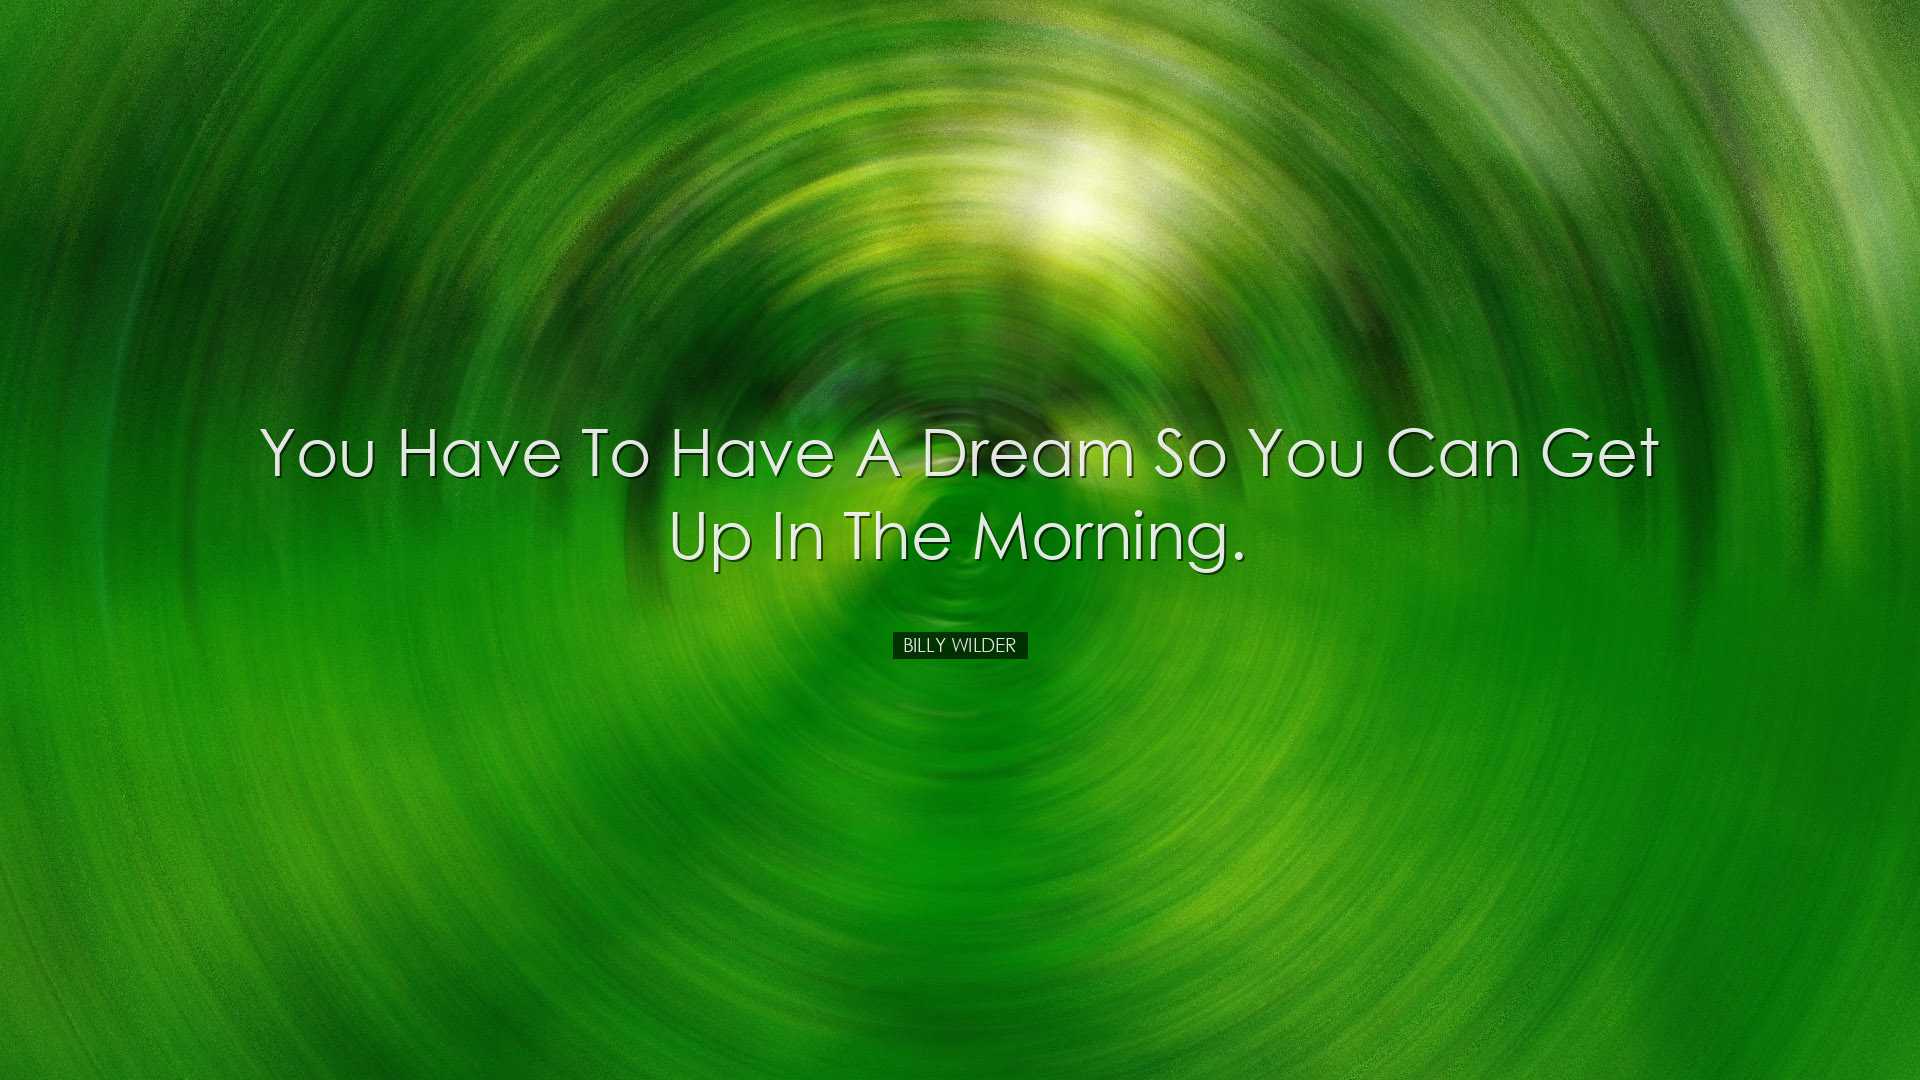 You have to have a dream so you can get up in the morning. - Billy